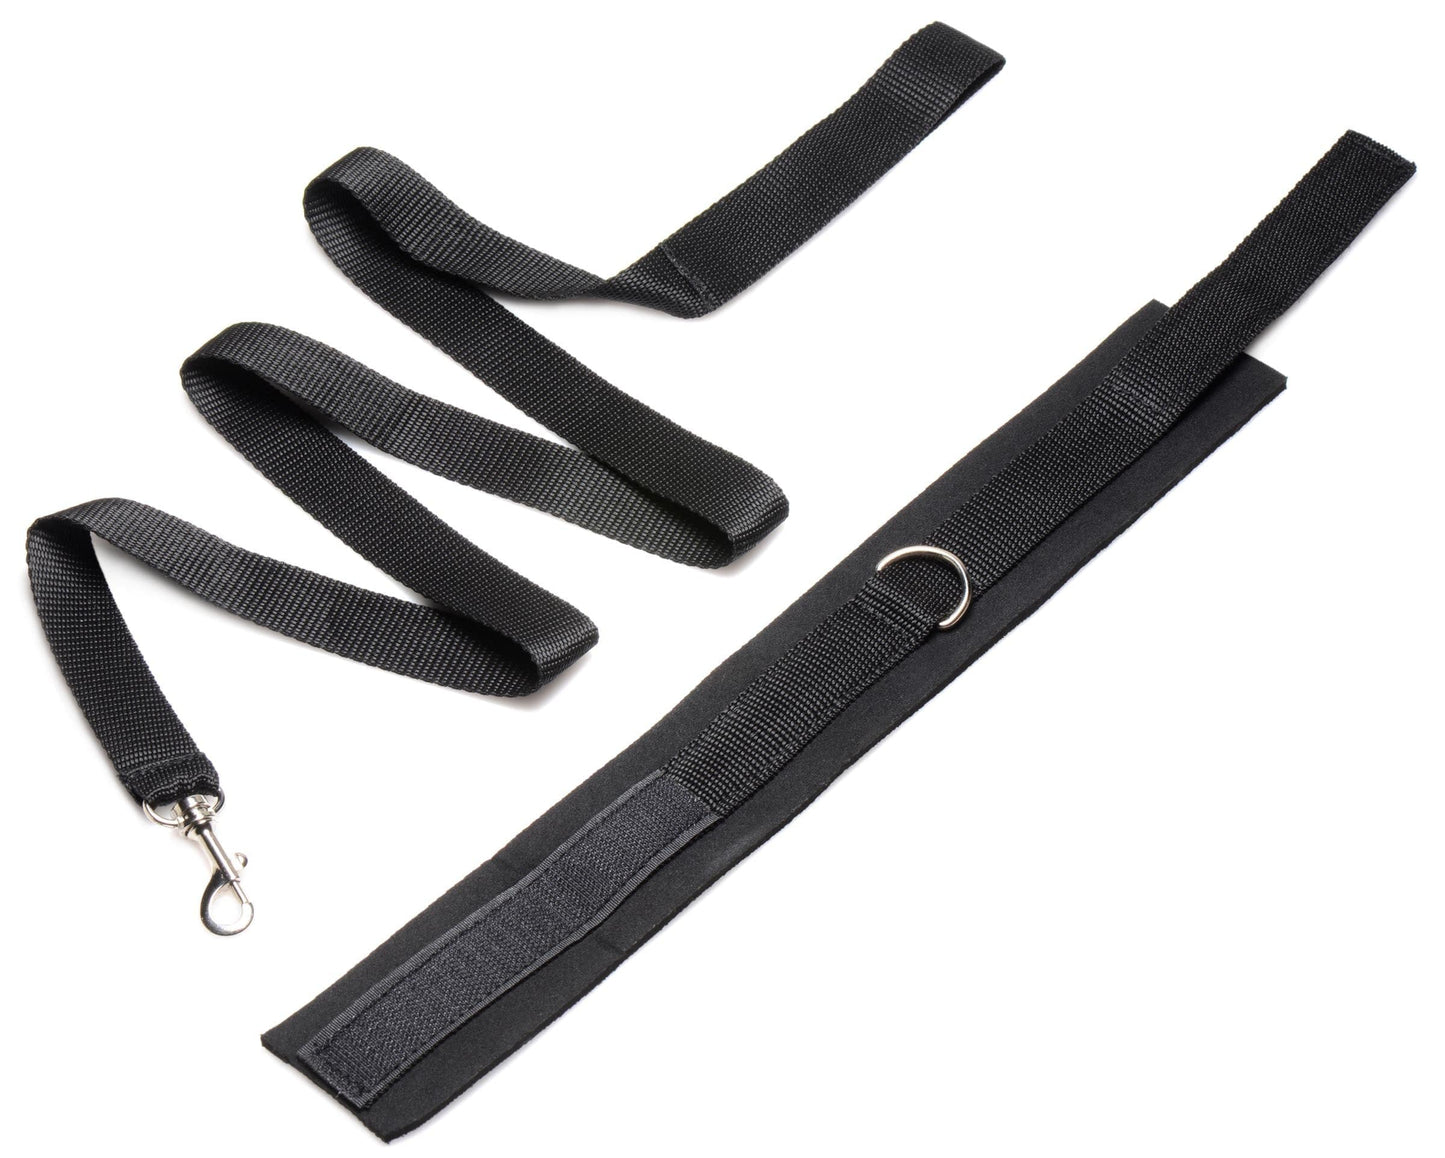 Frisky Leash and Collar Set Black Frisky 46 Inch Leash And Collar Set at the Haus of Shag